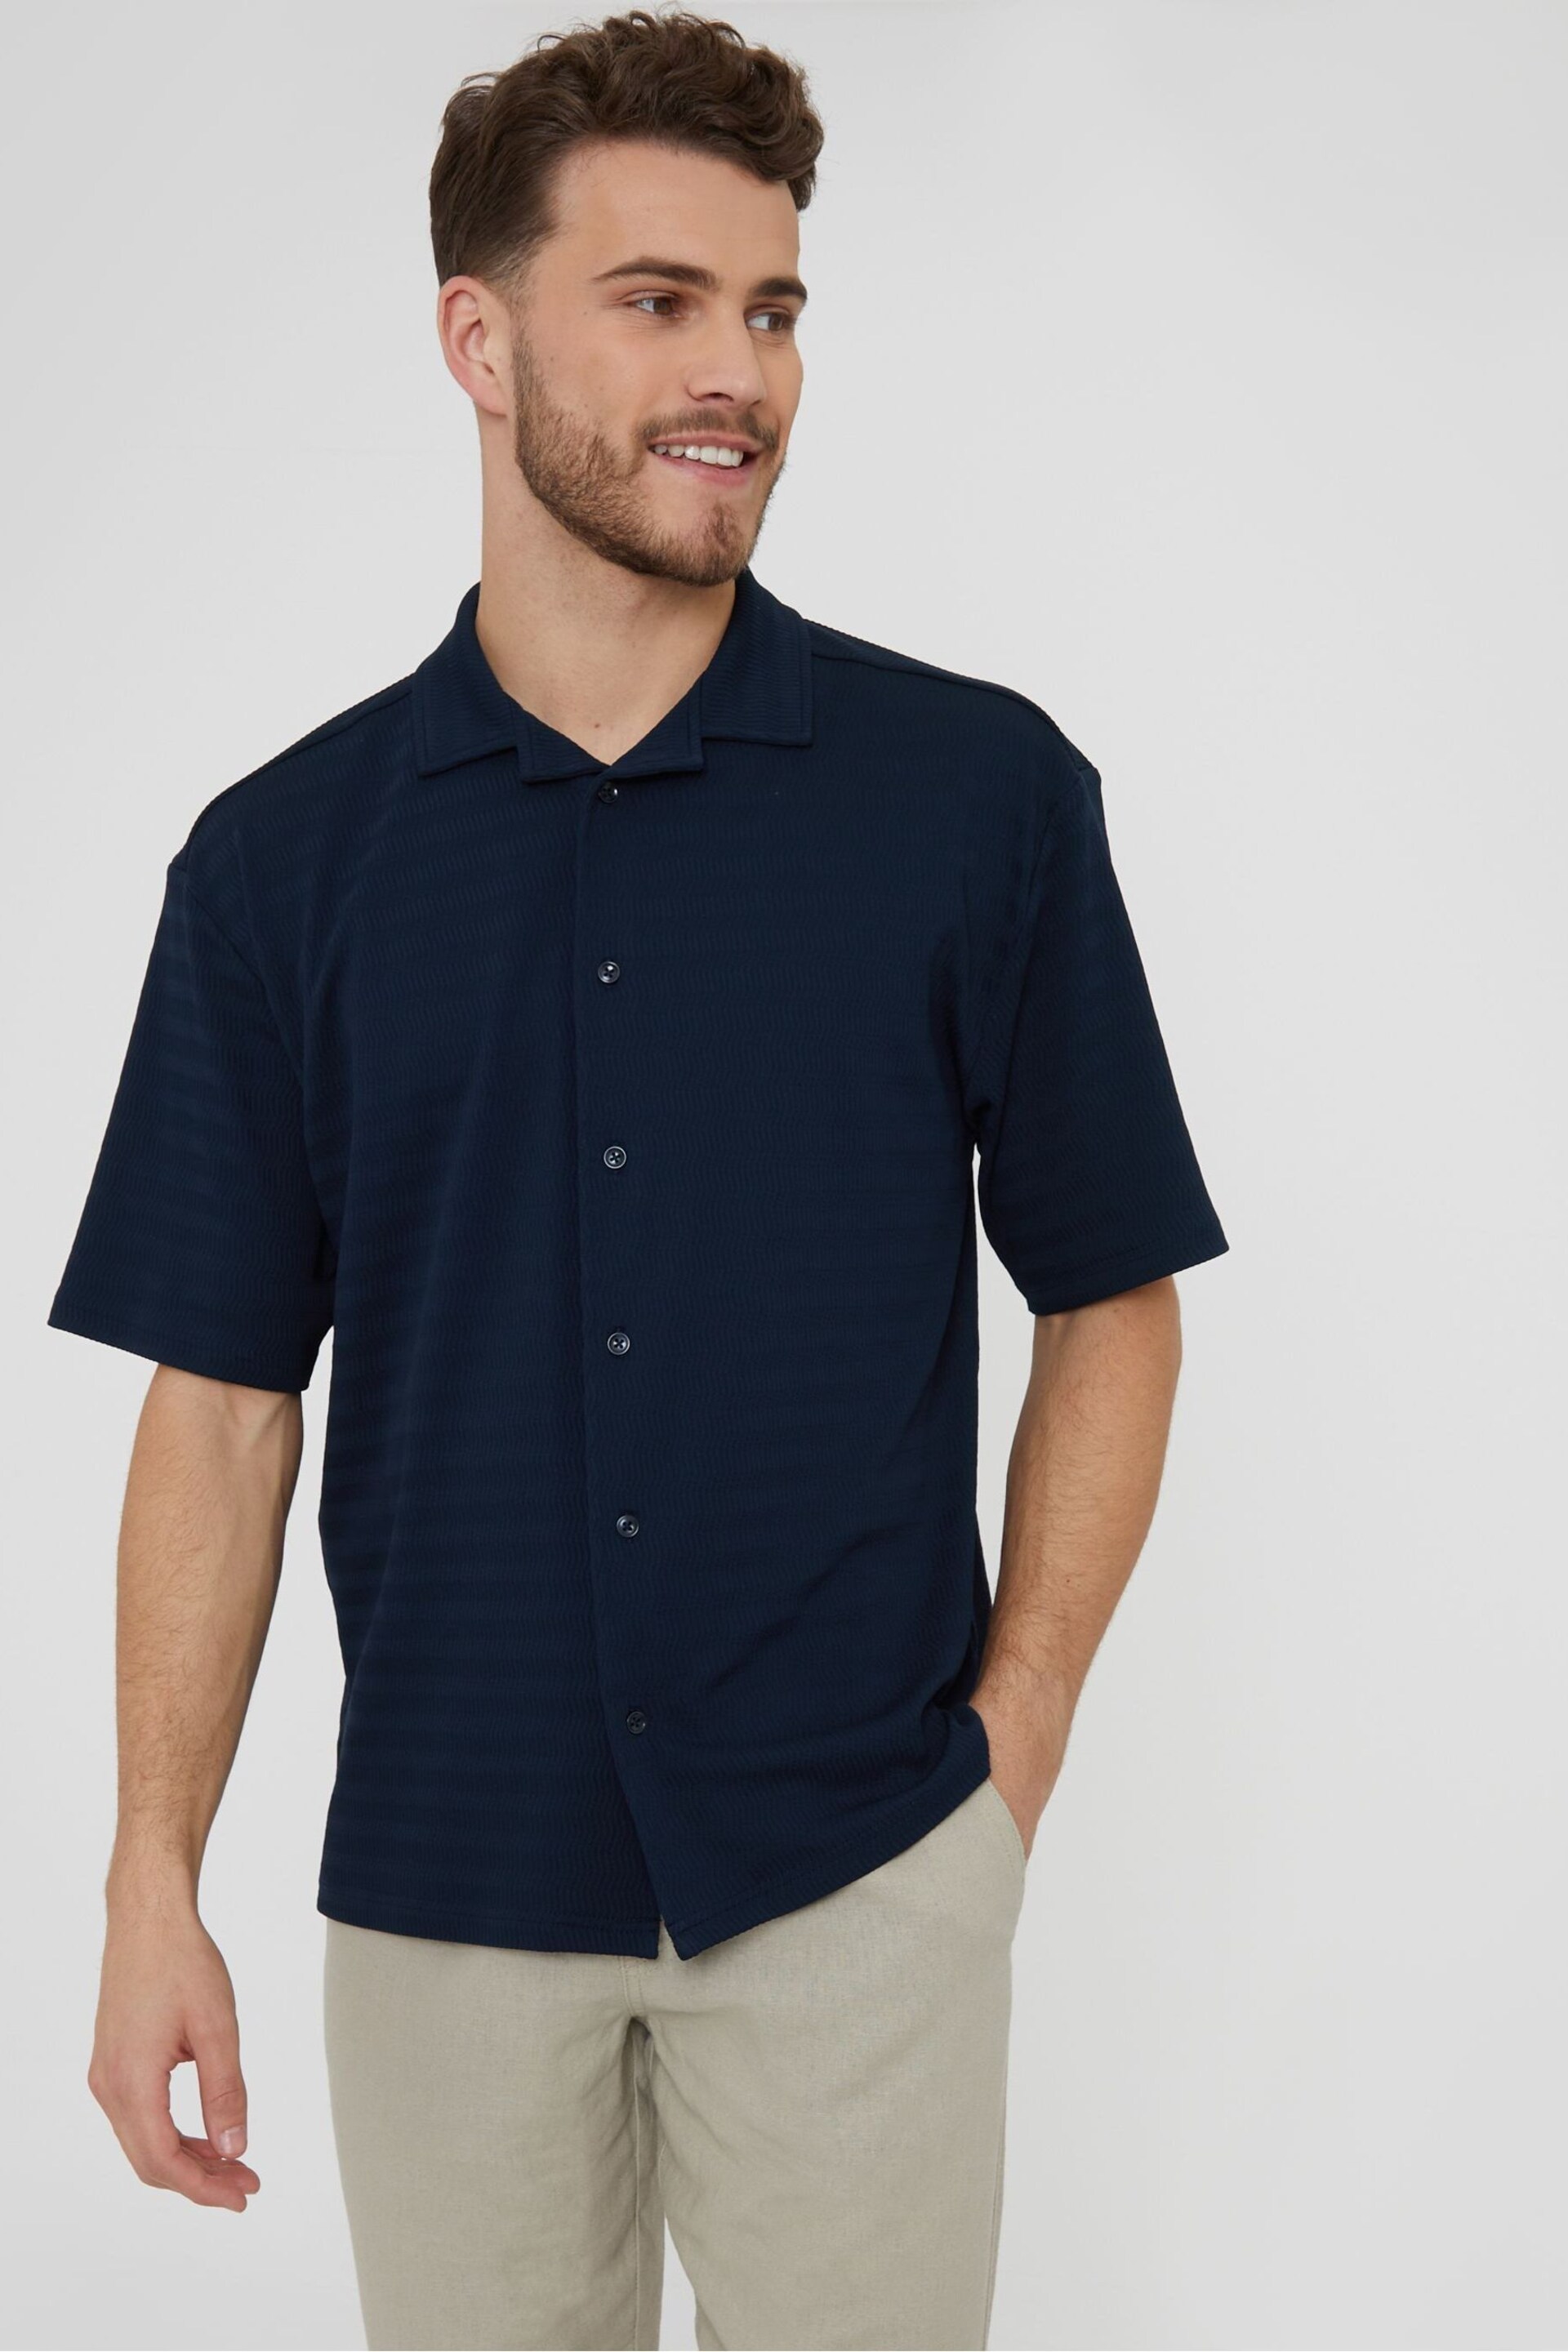 Threadbare Navy Textured Short Sleeve Cotton Shirt With Stretch - Image 1 of 4